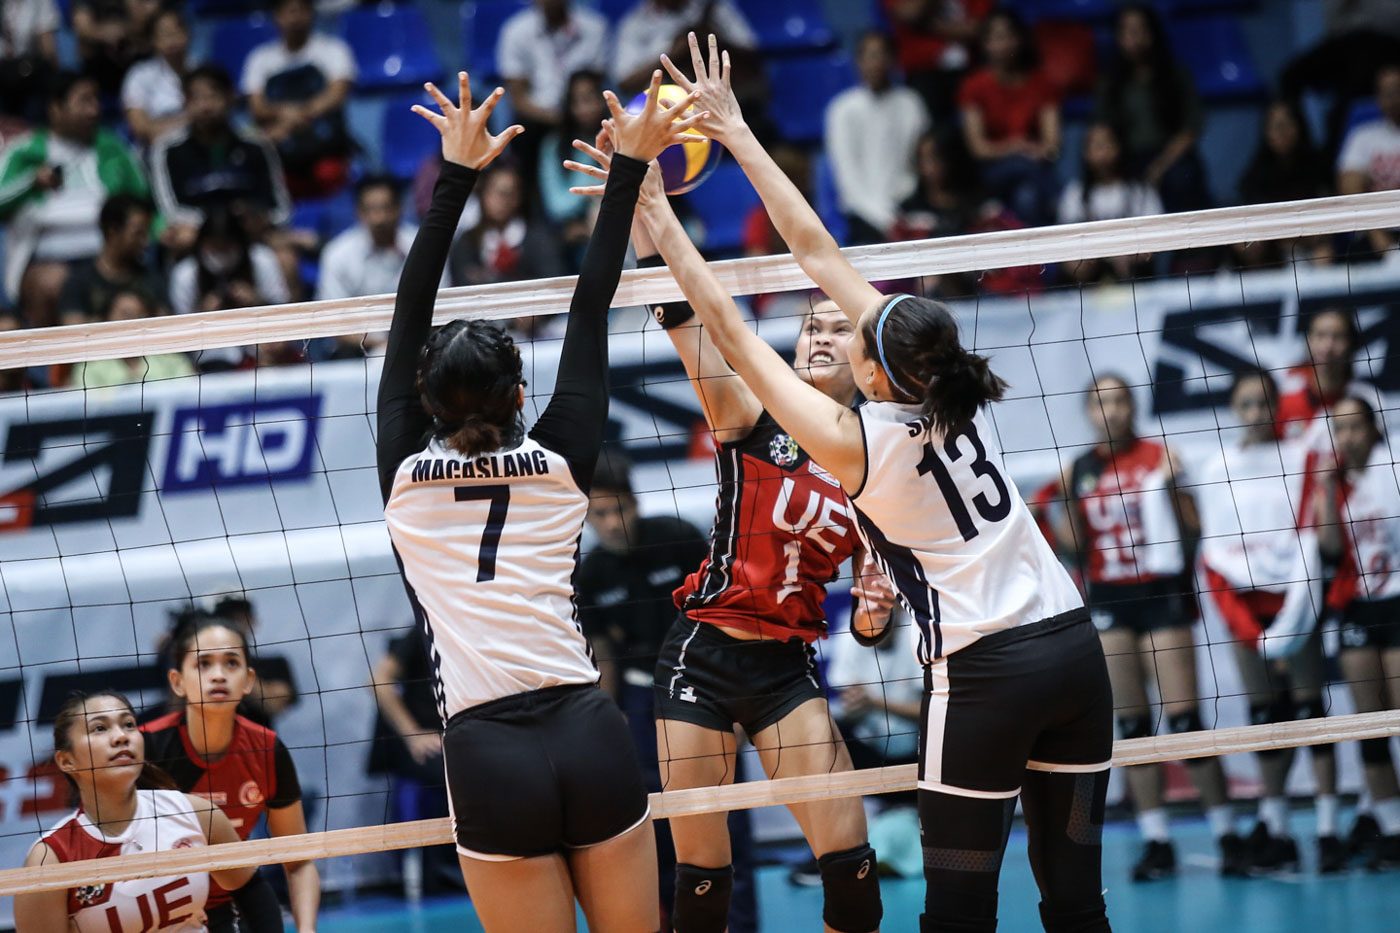 UE sweeps Adamson for best record in 7 years